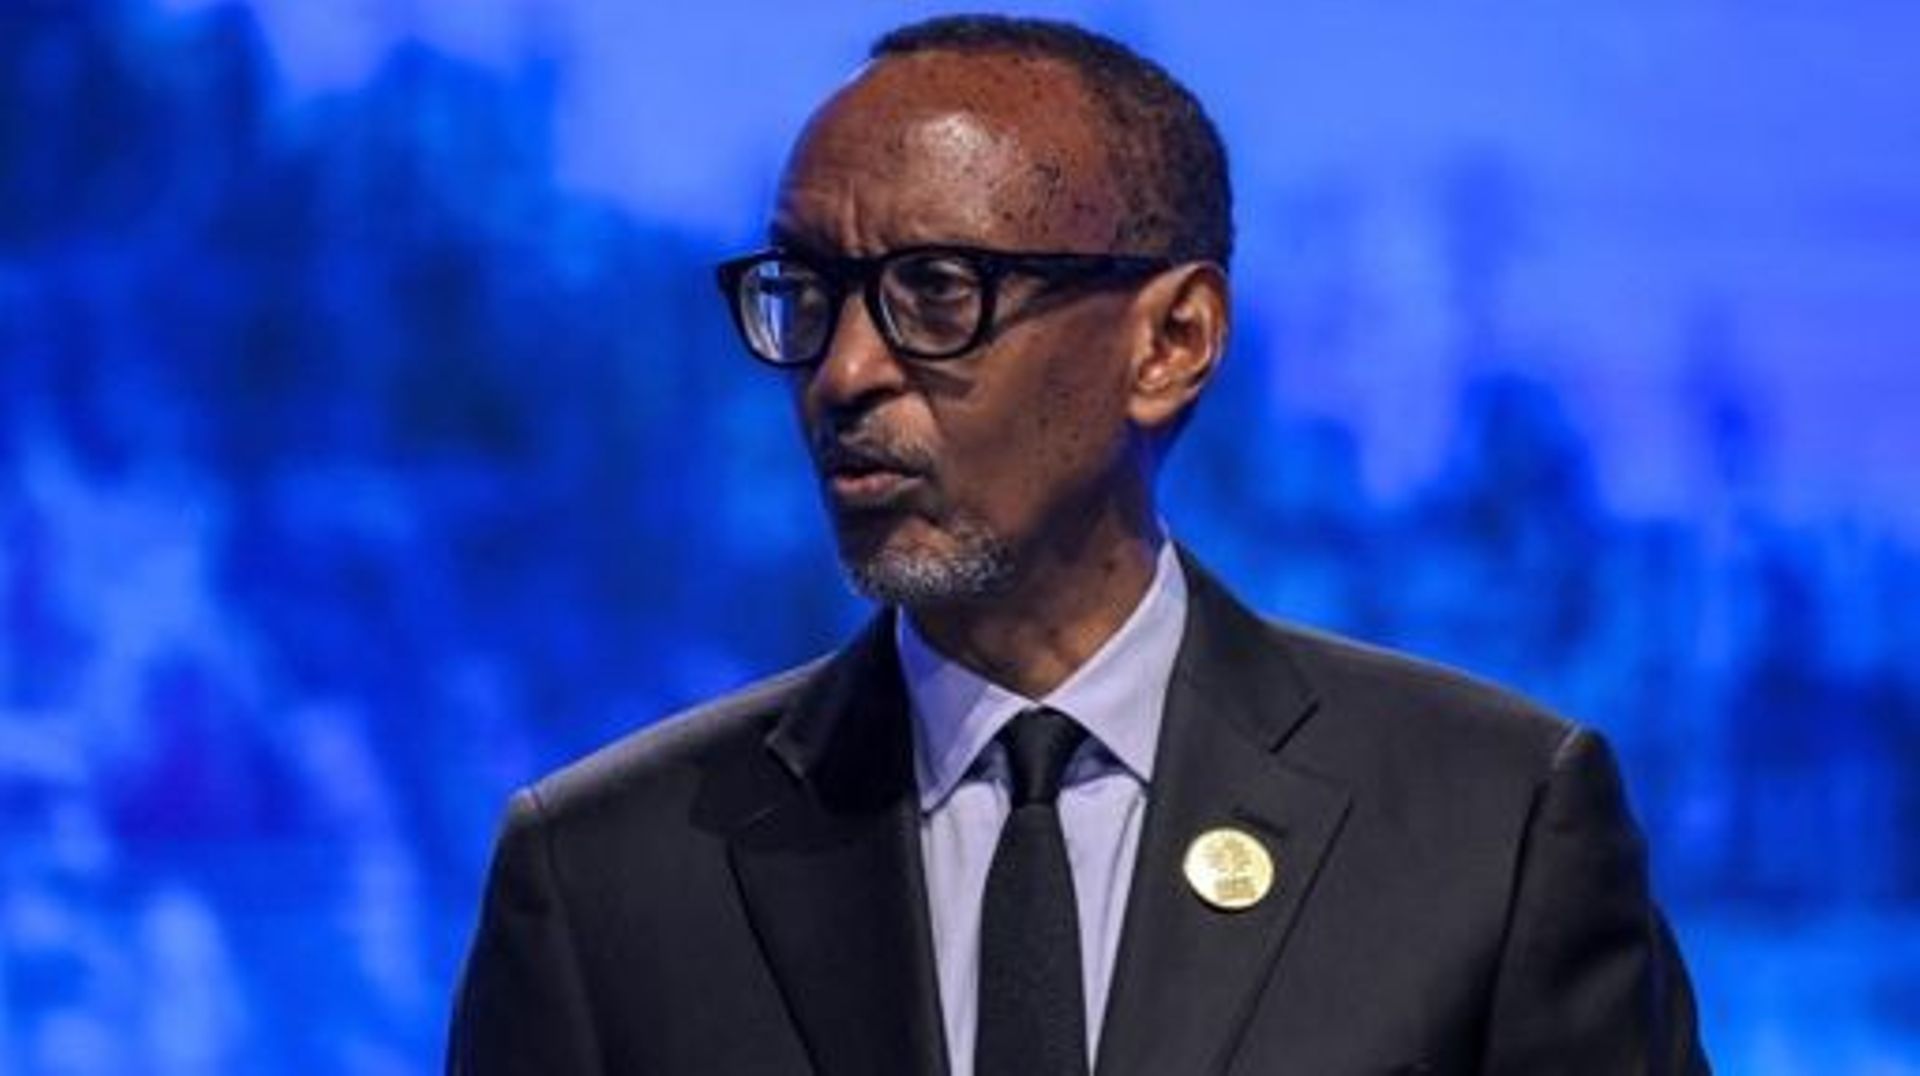 Rwanda’s President Paul Kagame delivers a speech at the leaders summit of the COP27 climate conference at the Sharm el-Sheikh International Convention Centre, in Egypt’s Red Sea resort city of the same name, on November 8, 2022. AHMAD GHARABLI / AFP